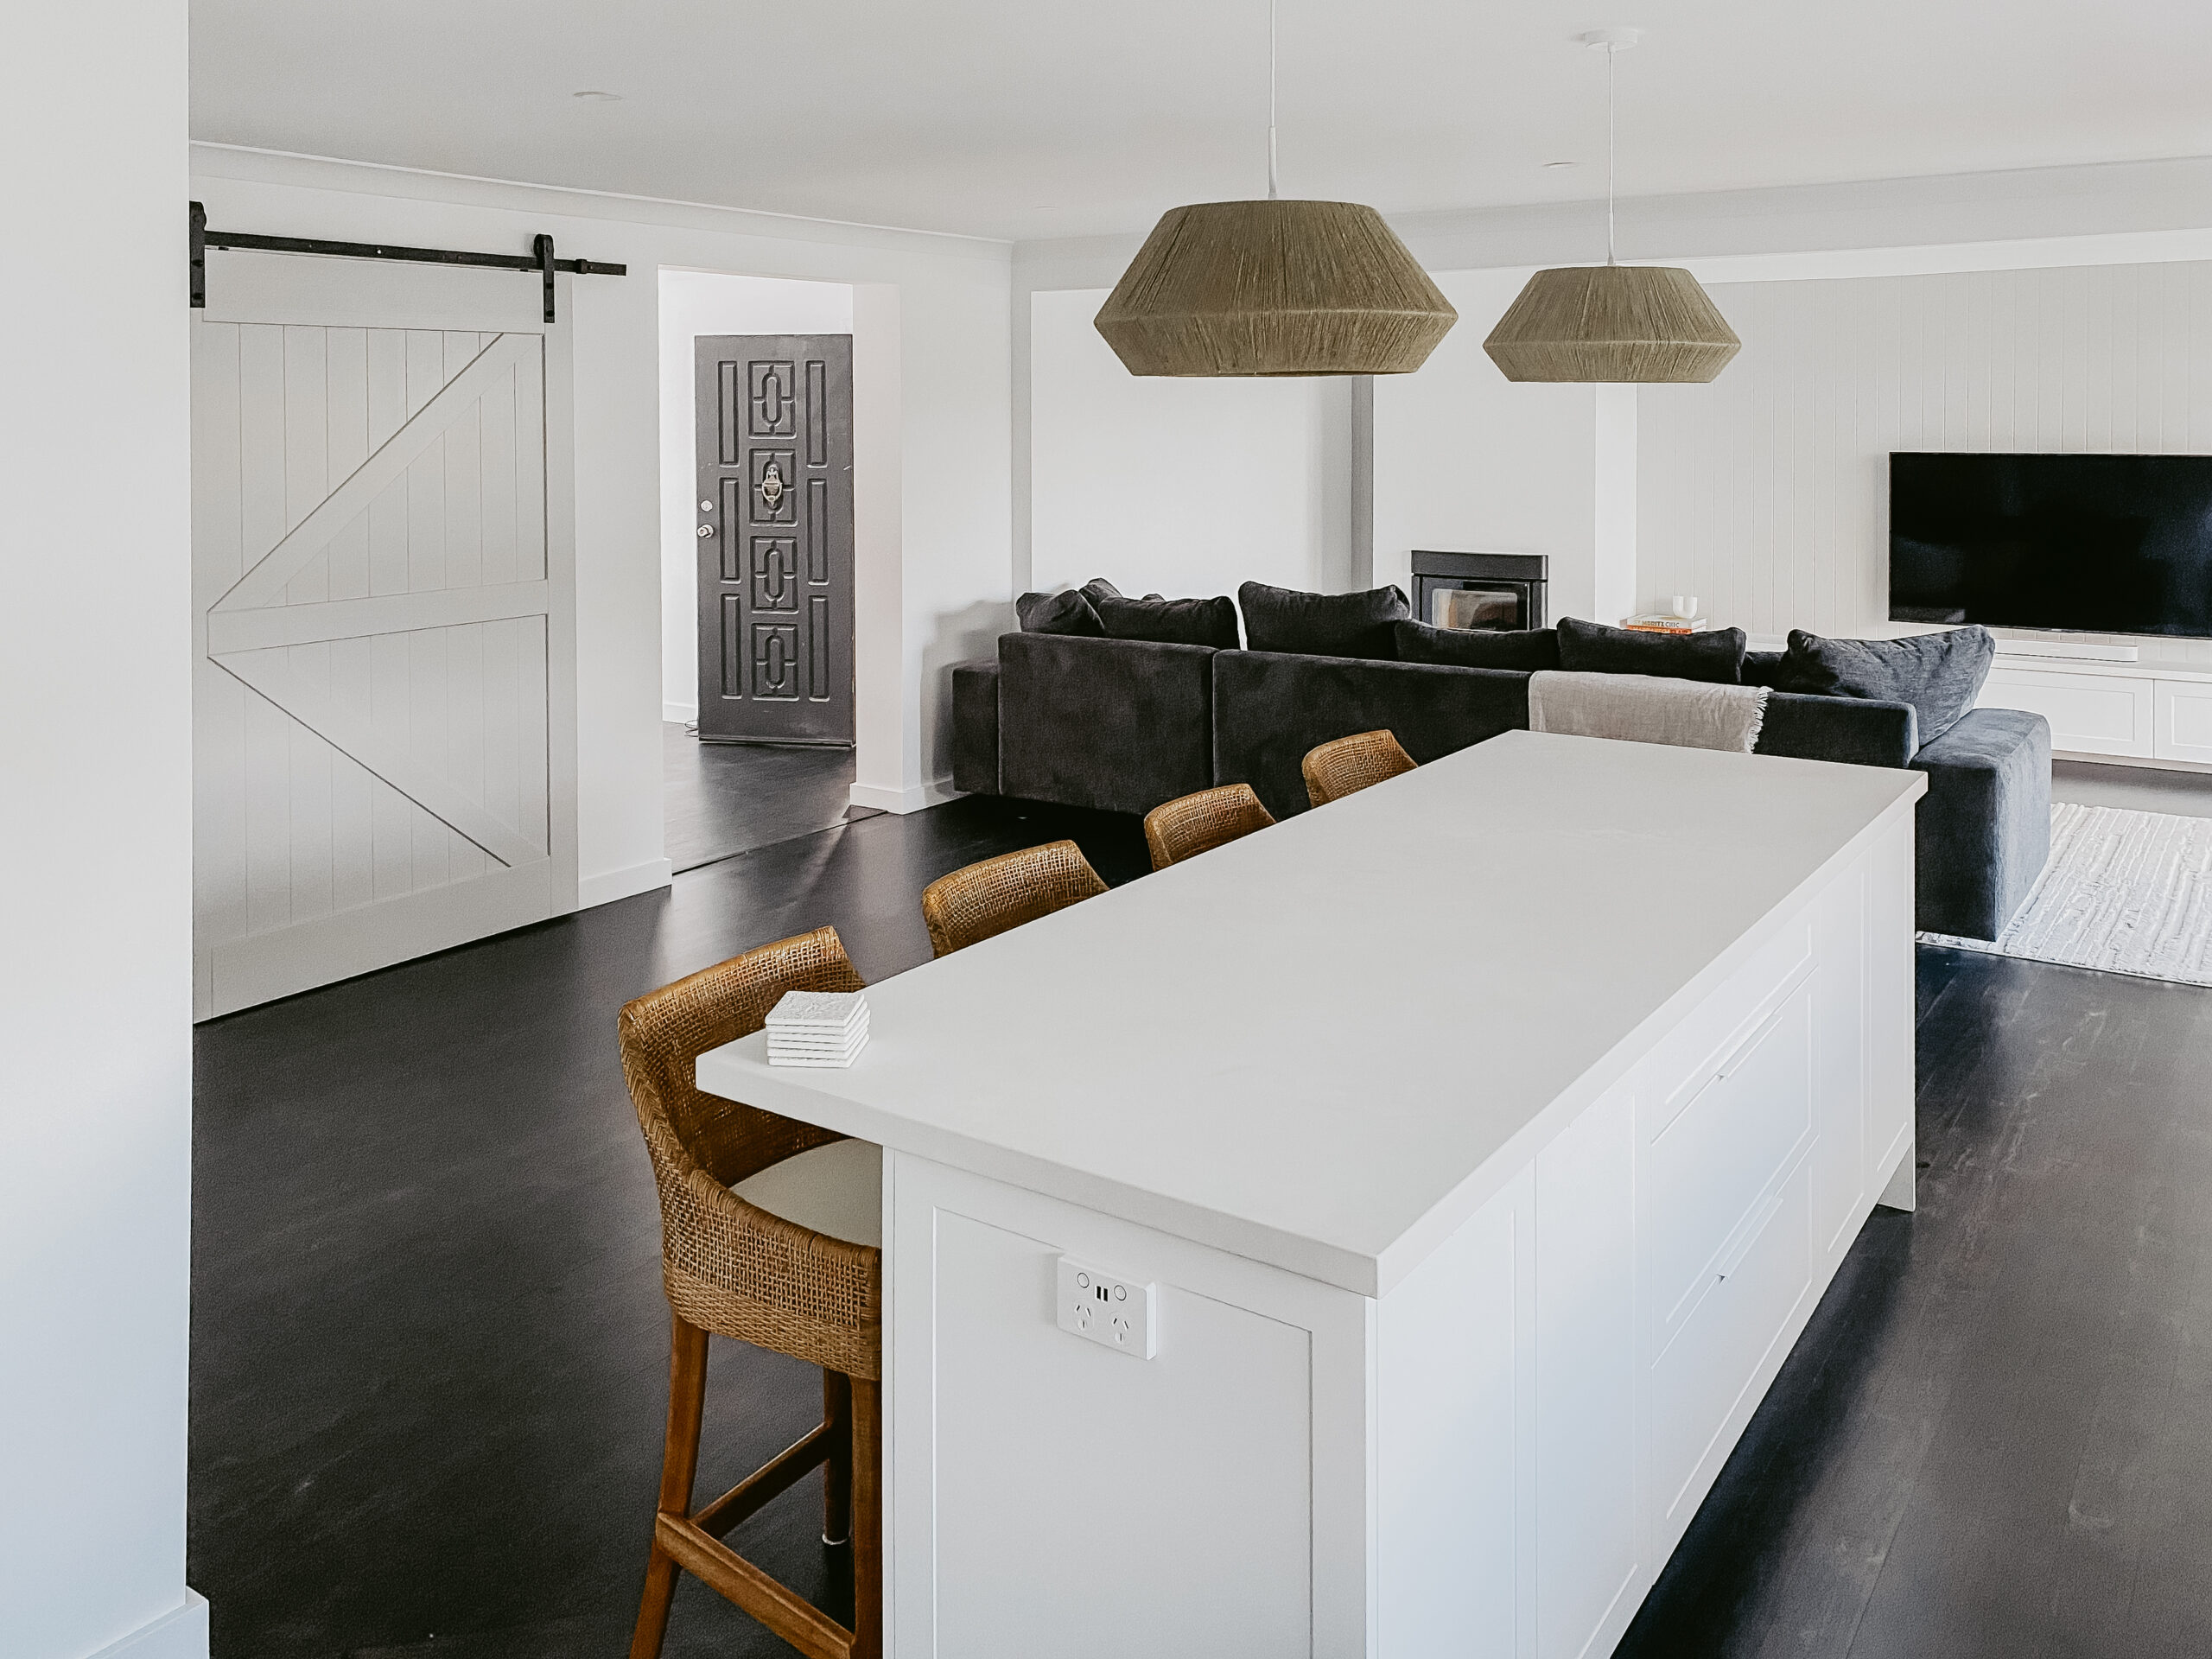 Renovation Builder Local to the Central Coast